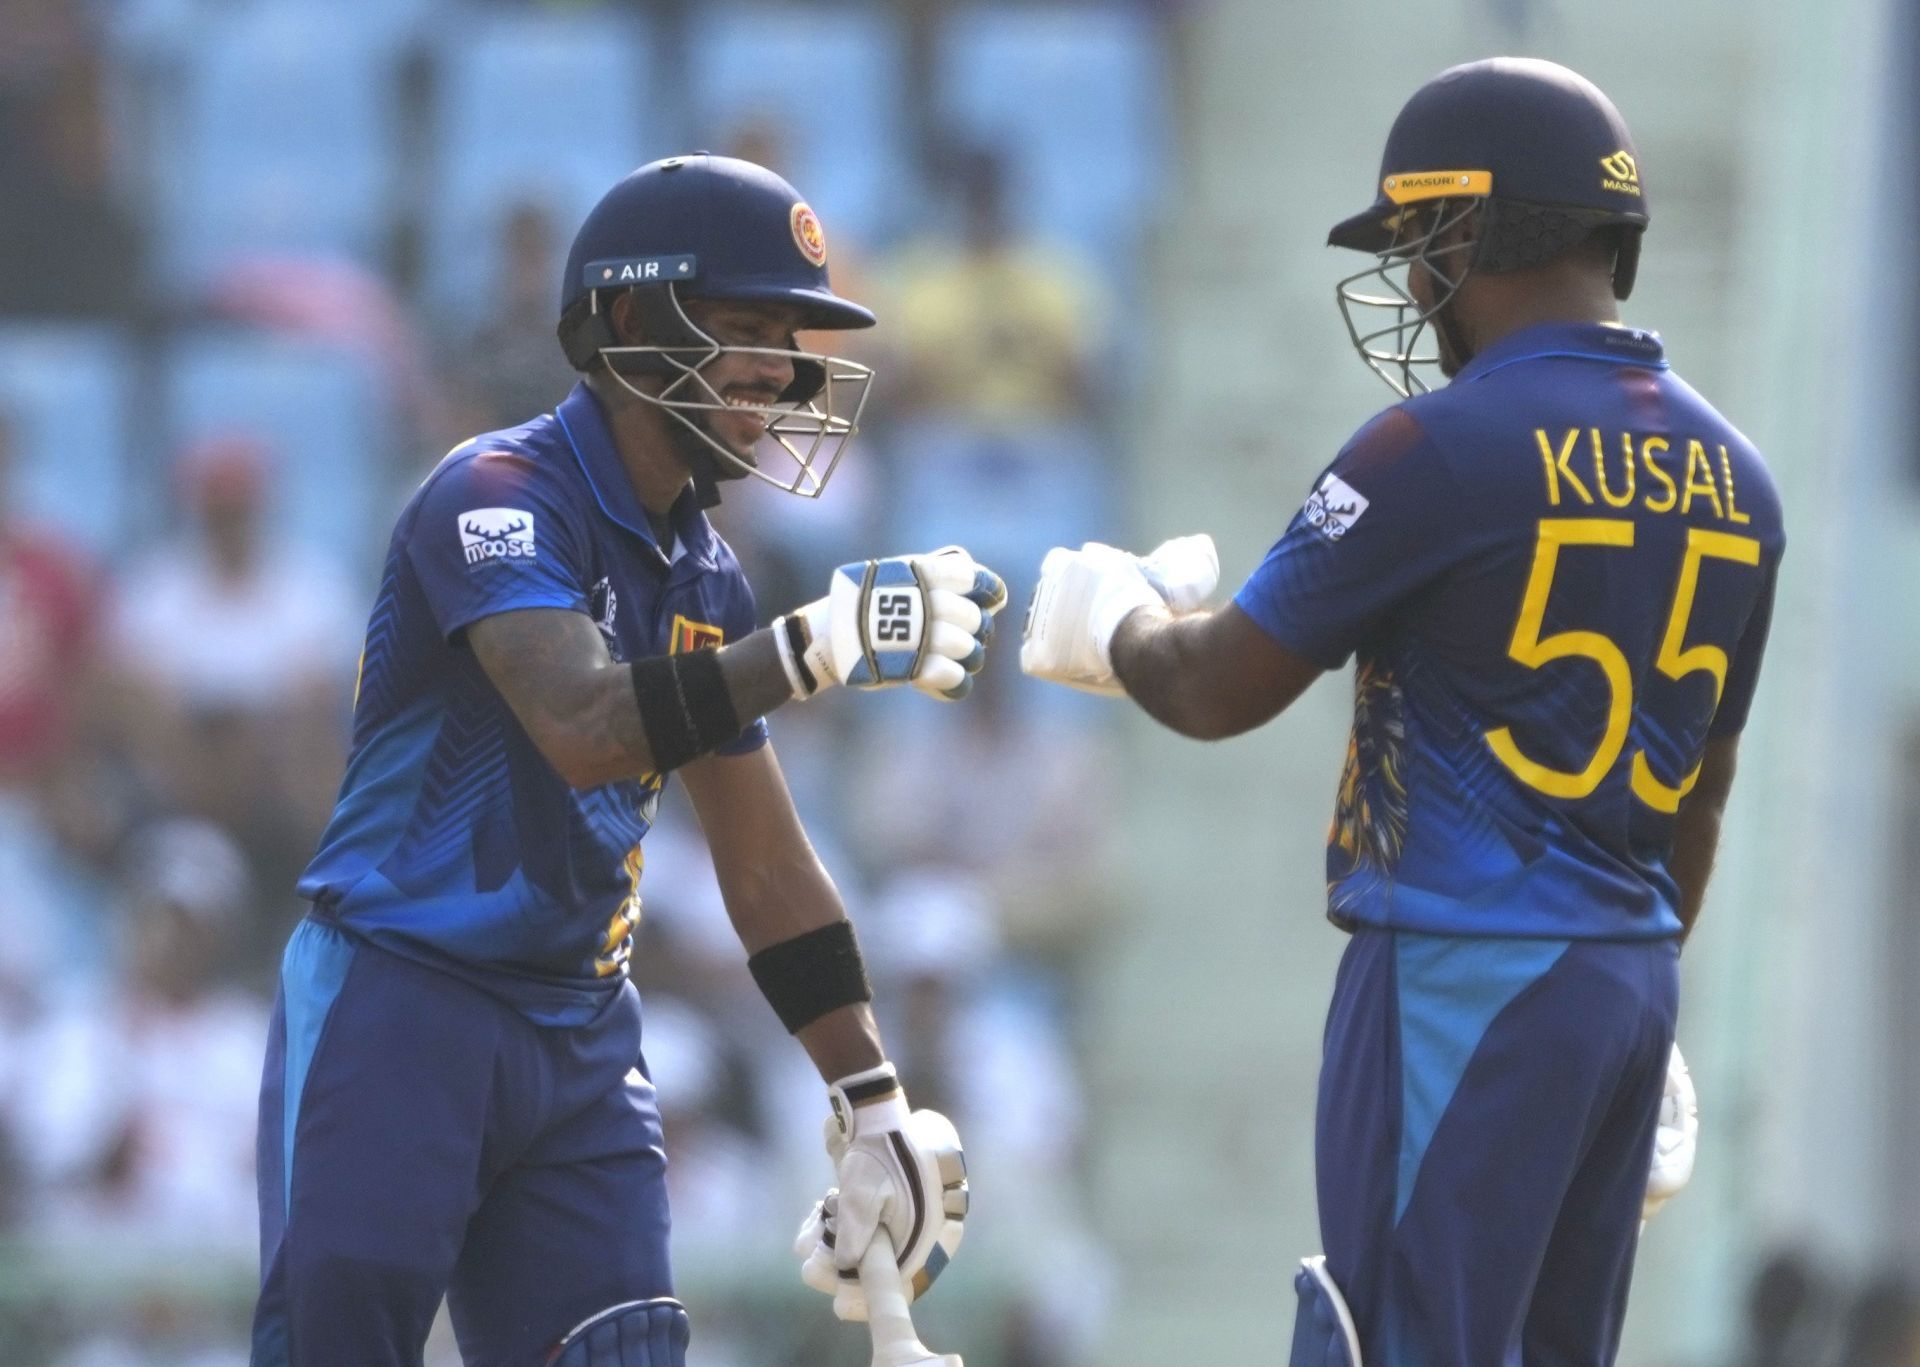 Sri Lanka failed to take advantage of the solid foundation laid by their openers. [P/C: AP]